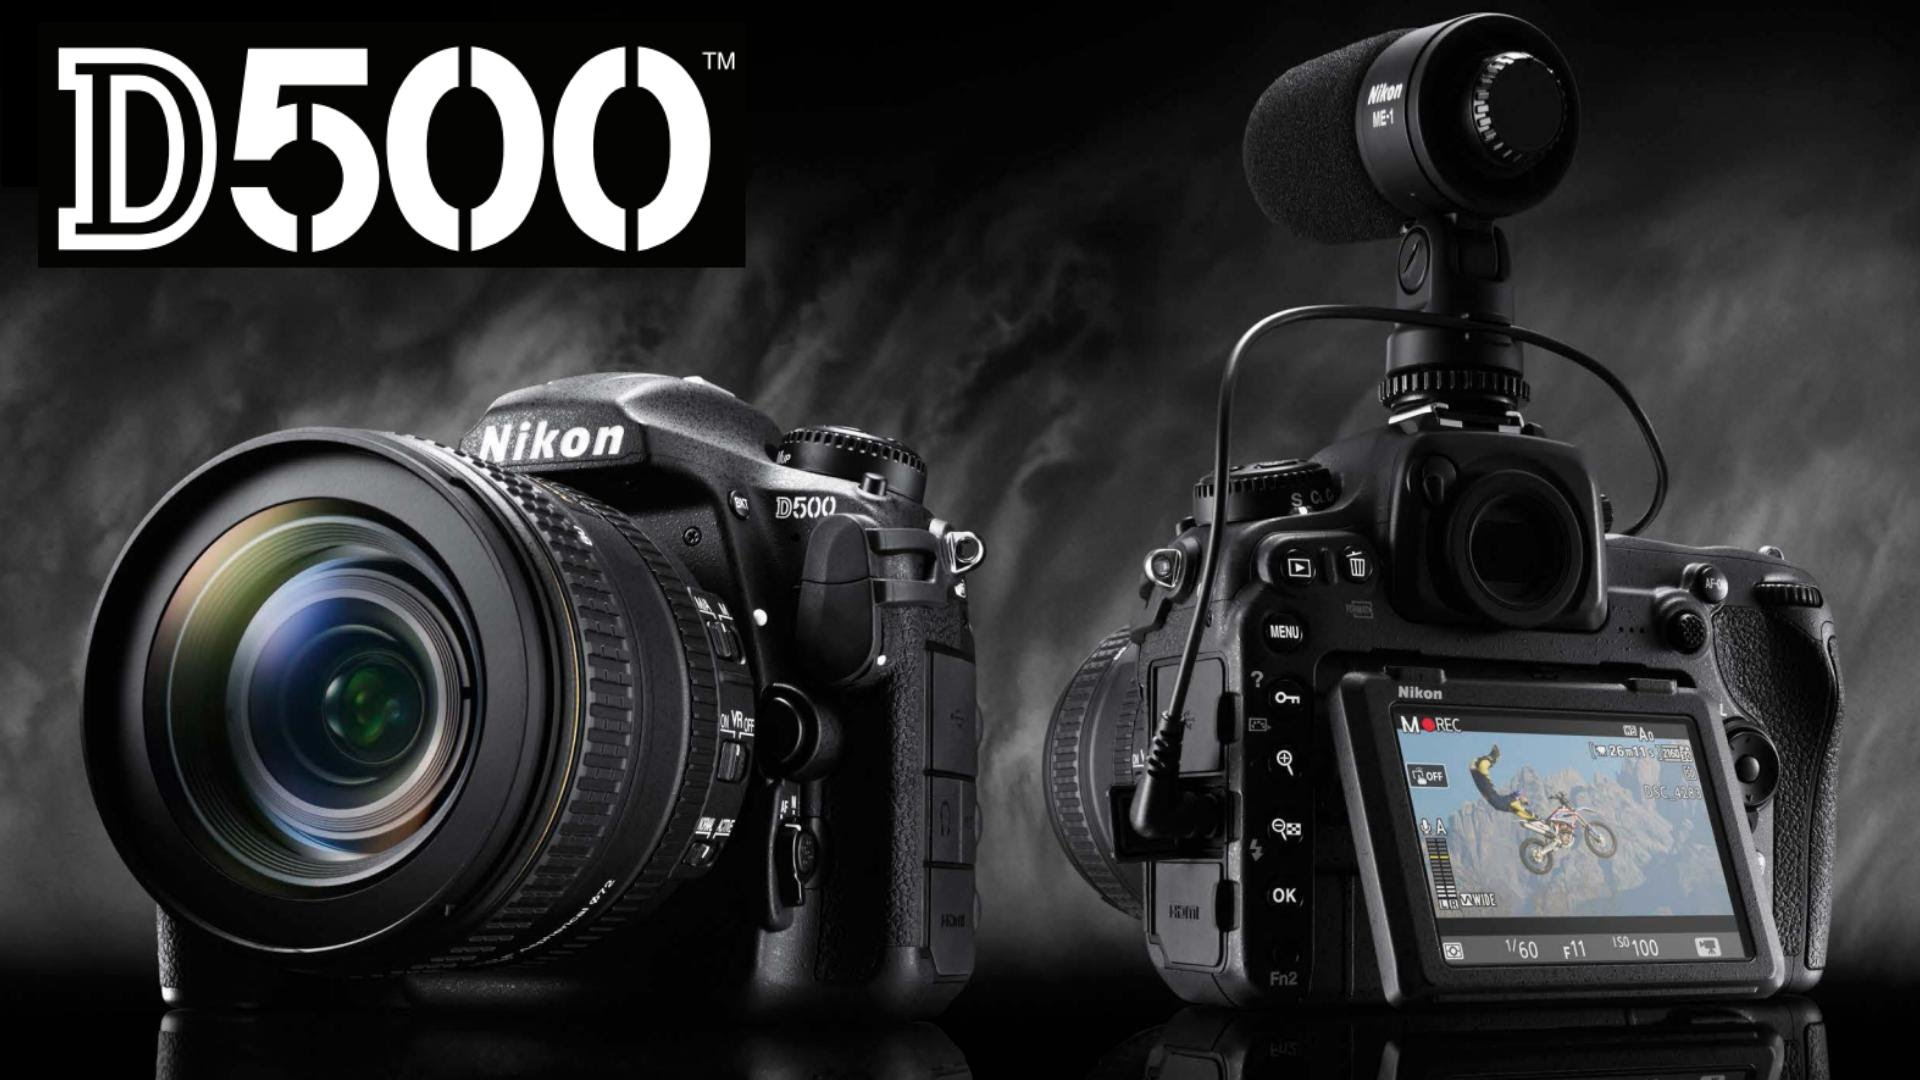 Review of the Nikon D500 for Wildlife and Bird Photography